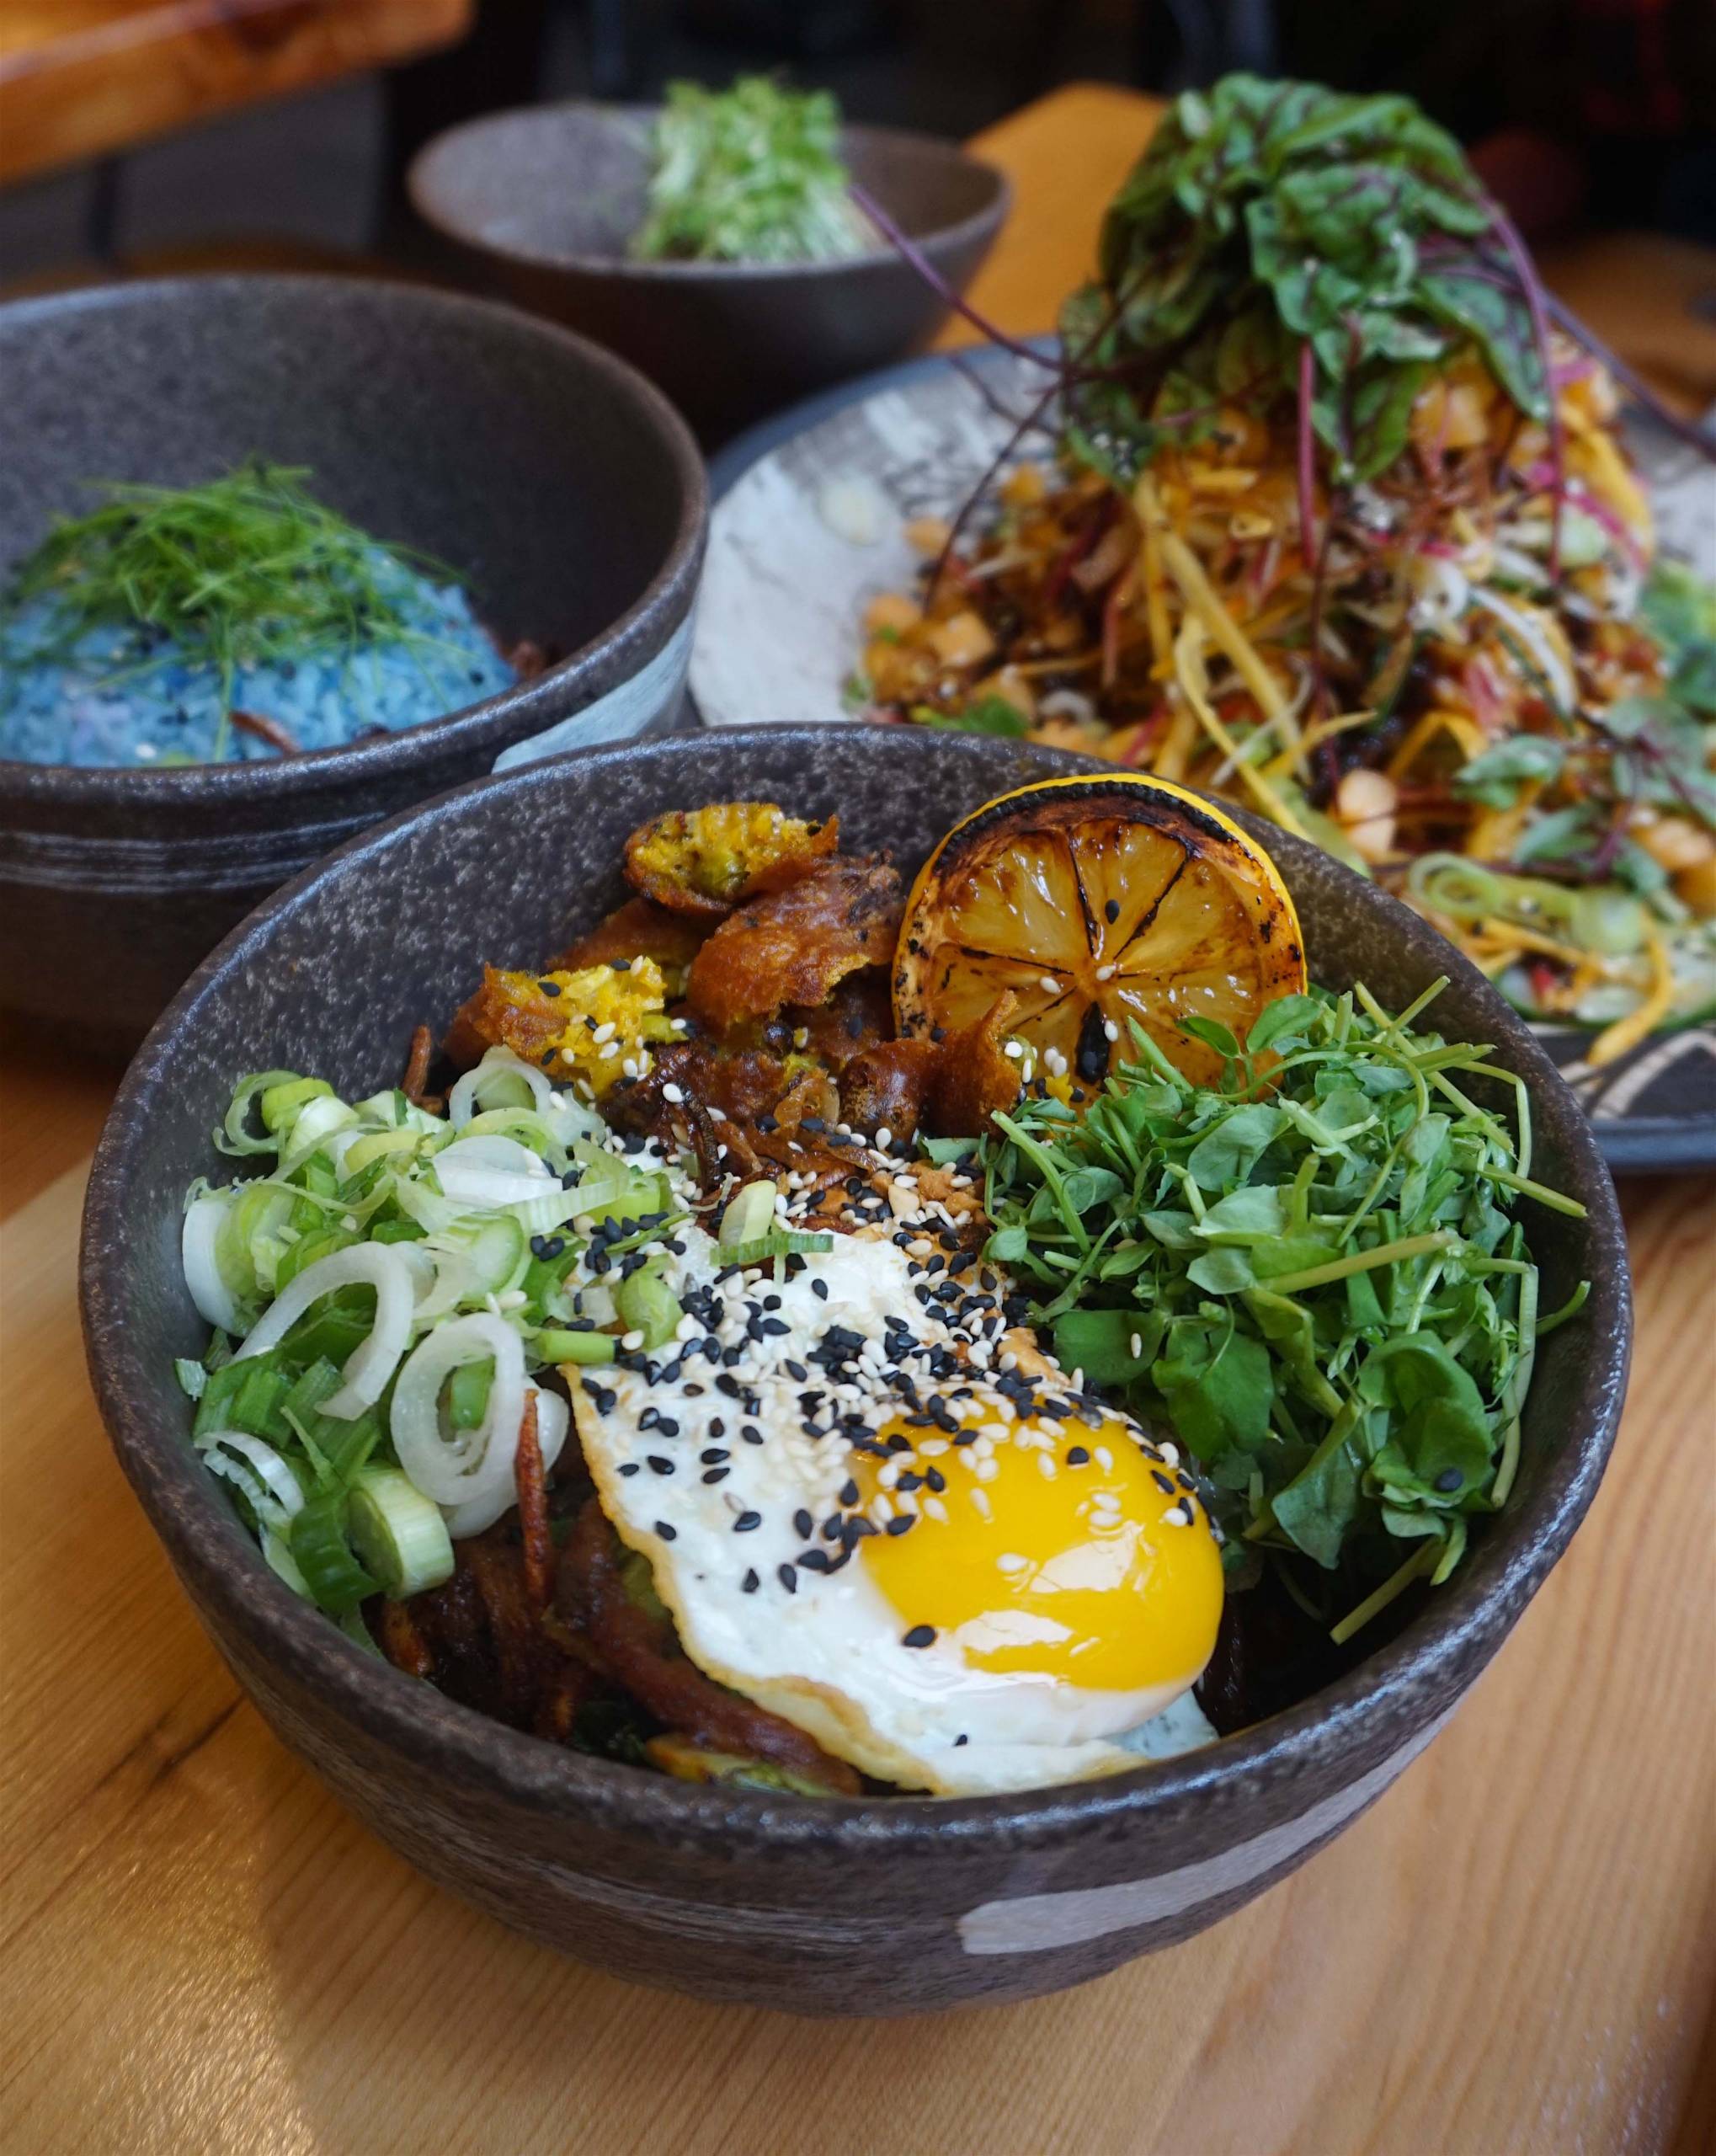 In the foreground, a bowl of turmeric noodles topped with greens, scallions, a charred lemon, and a fried egg.